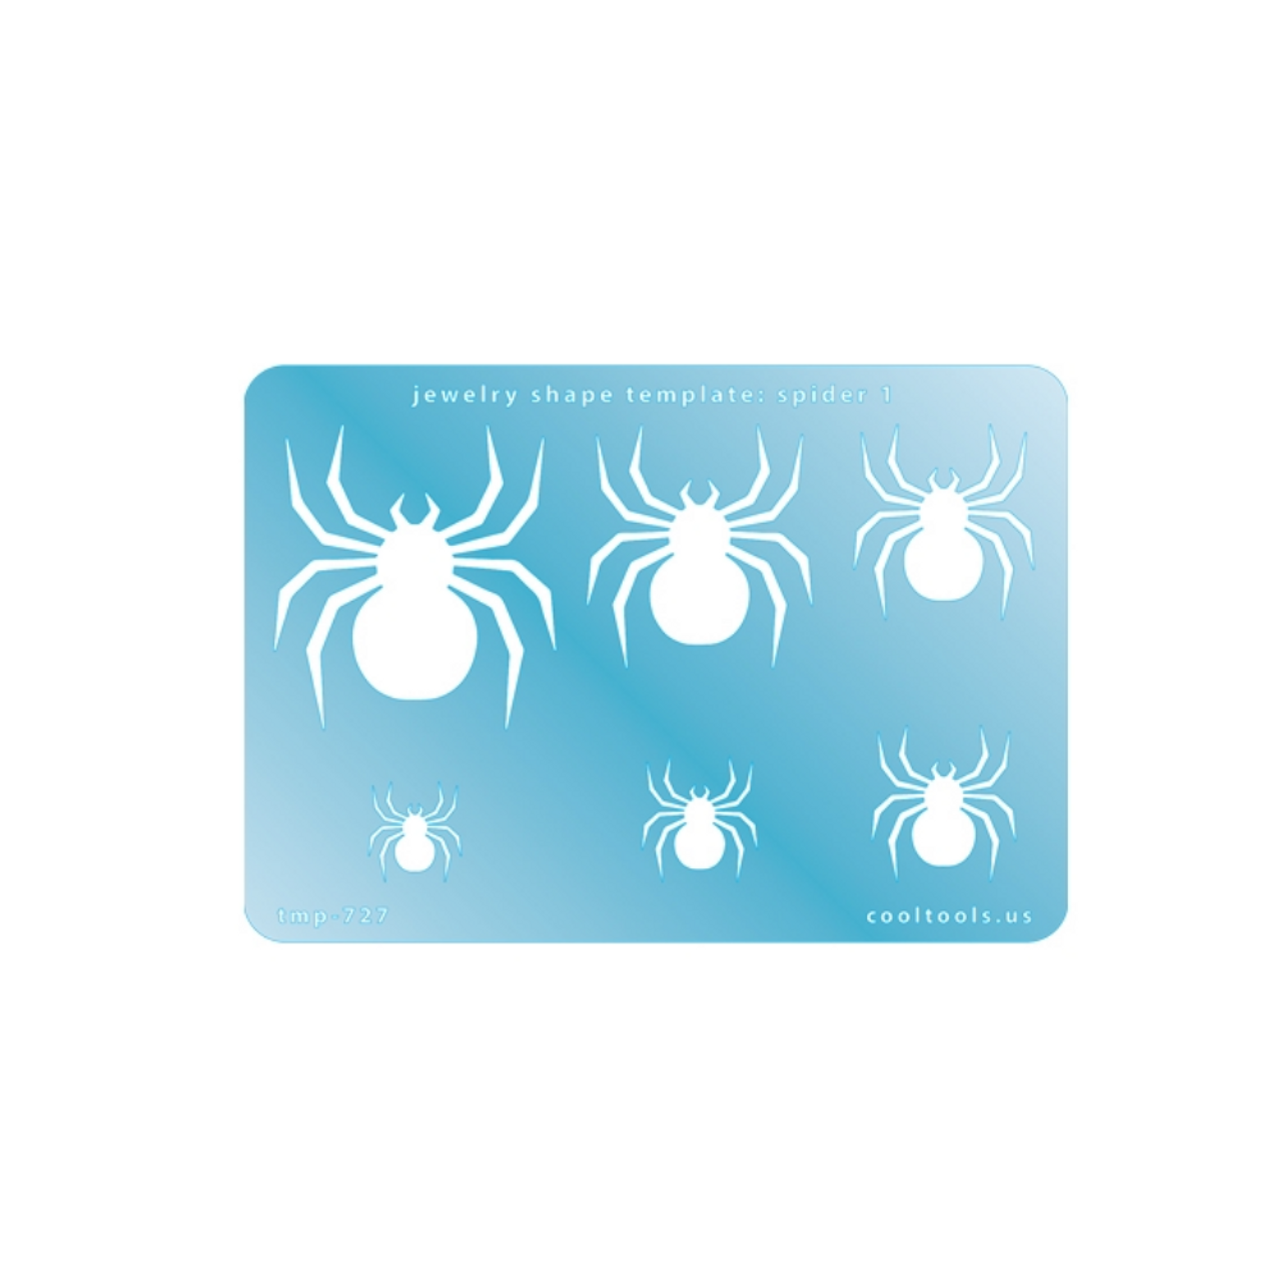 Spider template by CoolTools